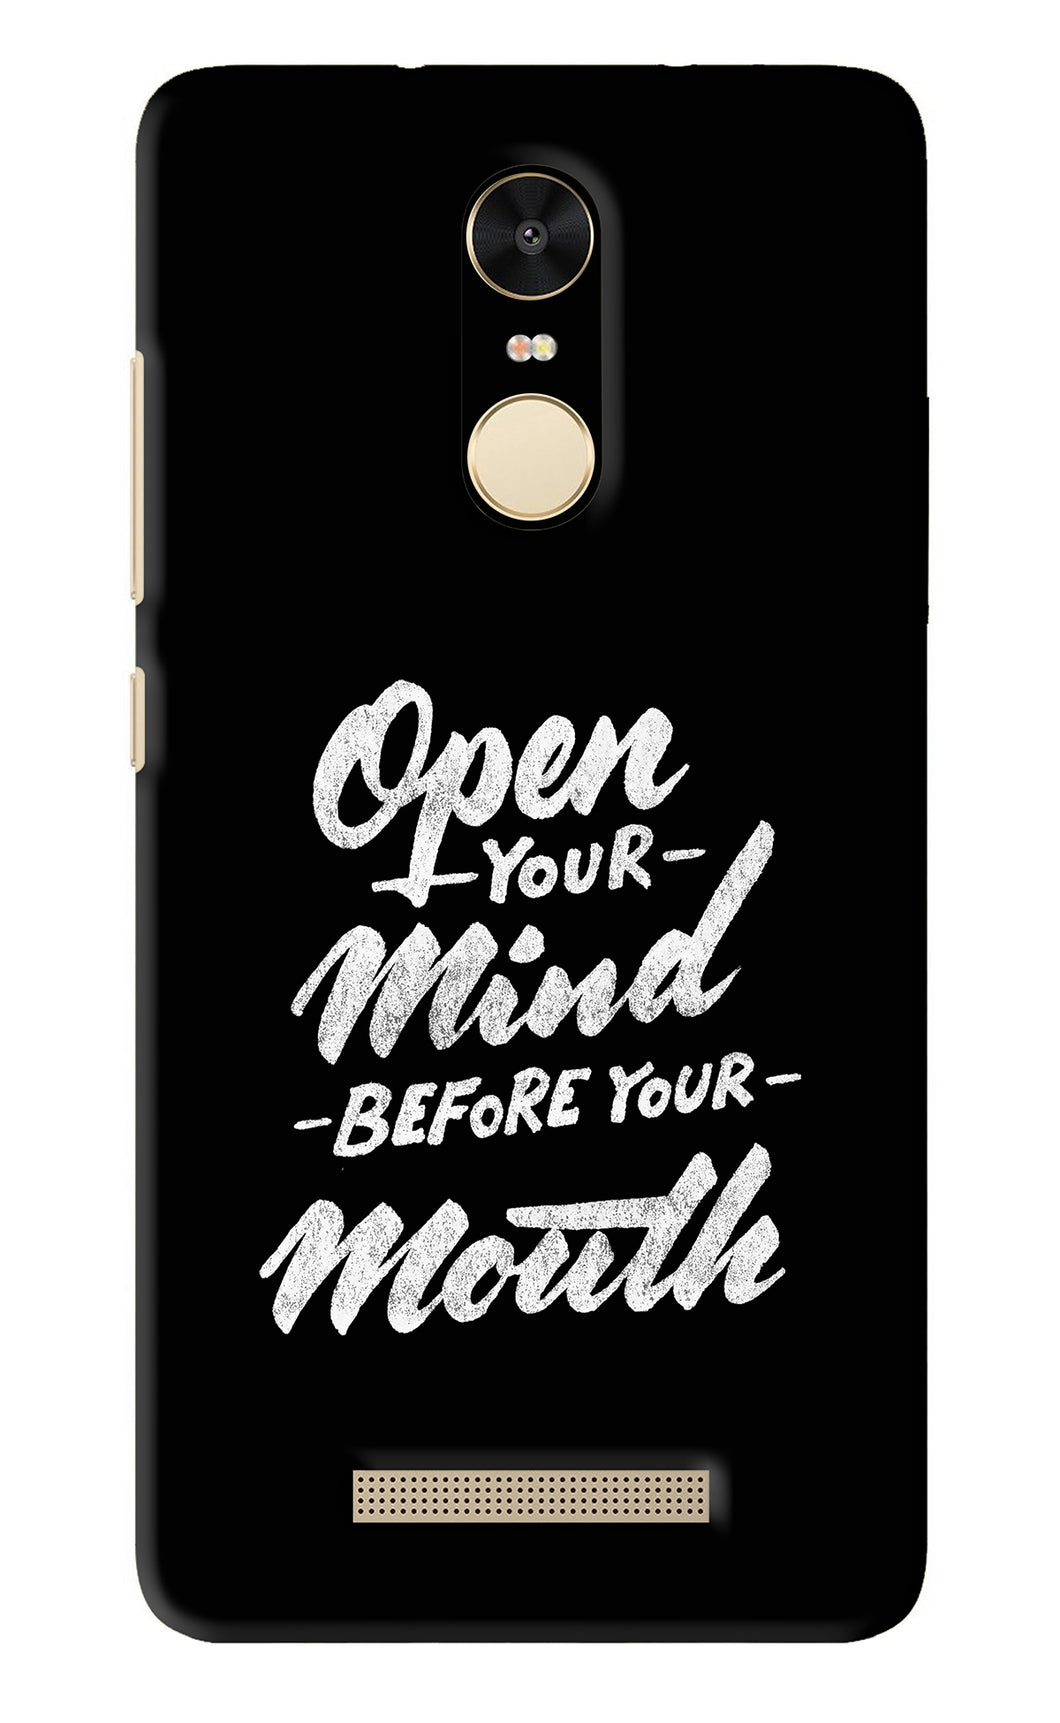 Open Your Mind Before Your Mouth Xiaomi Redmi Note 3 Back Skin Wrap